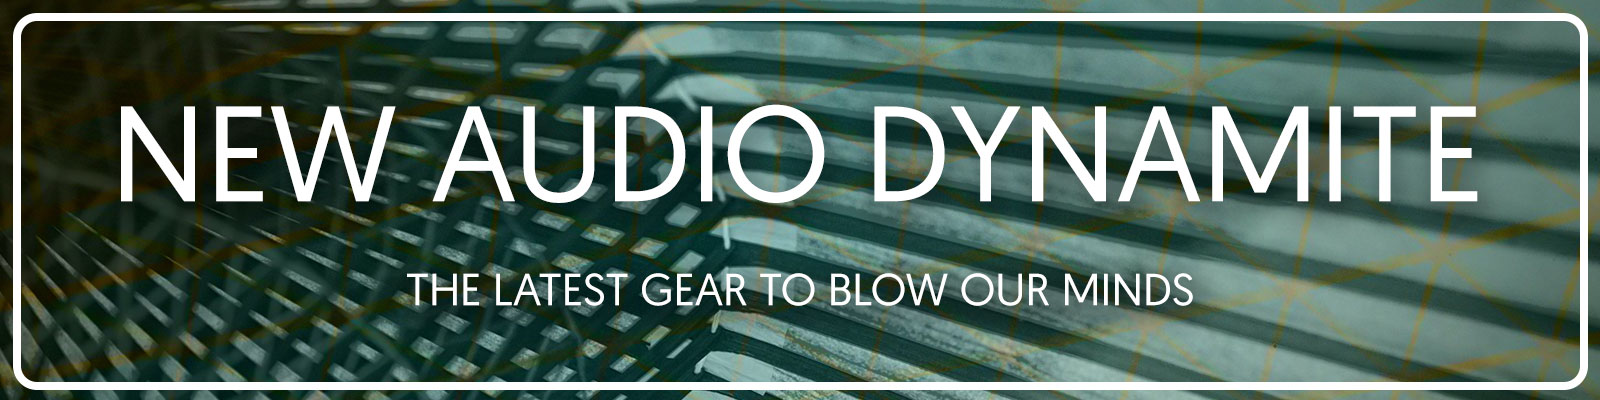 New Audio Dynamite | Get the latest gear at Audio Sanctuary